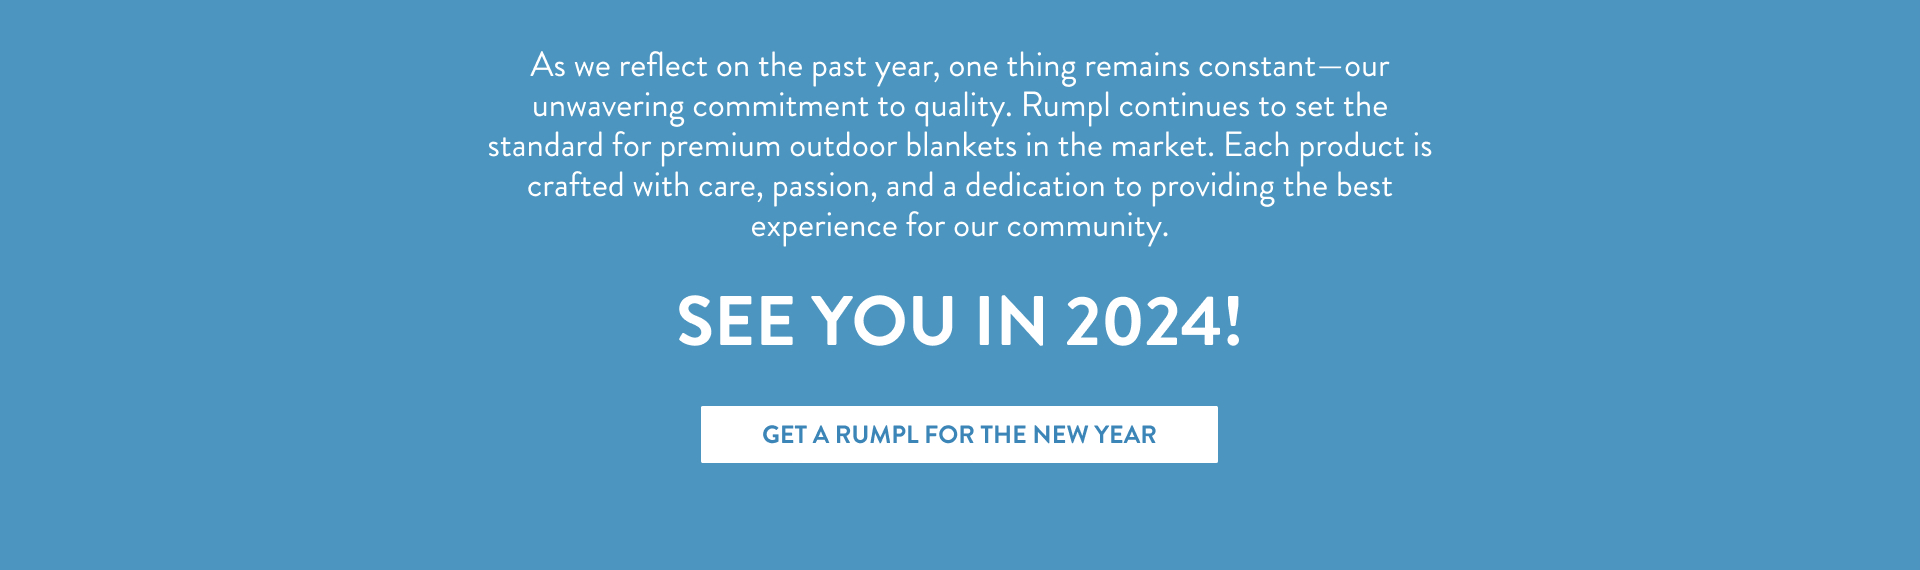 Get a Rumpl for New Year